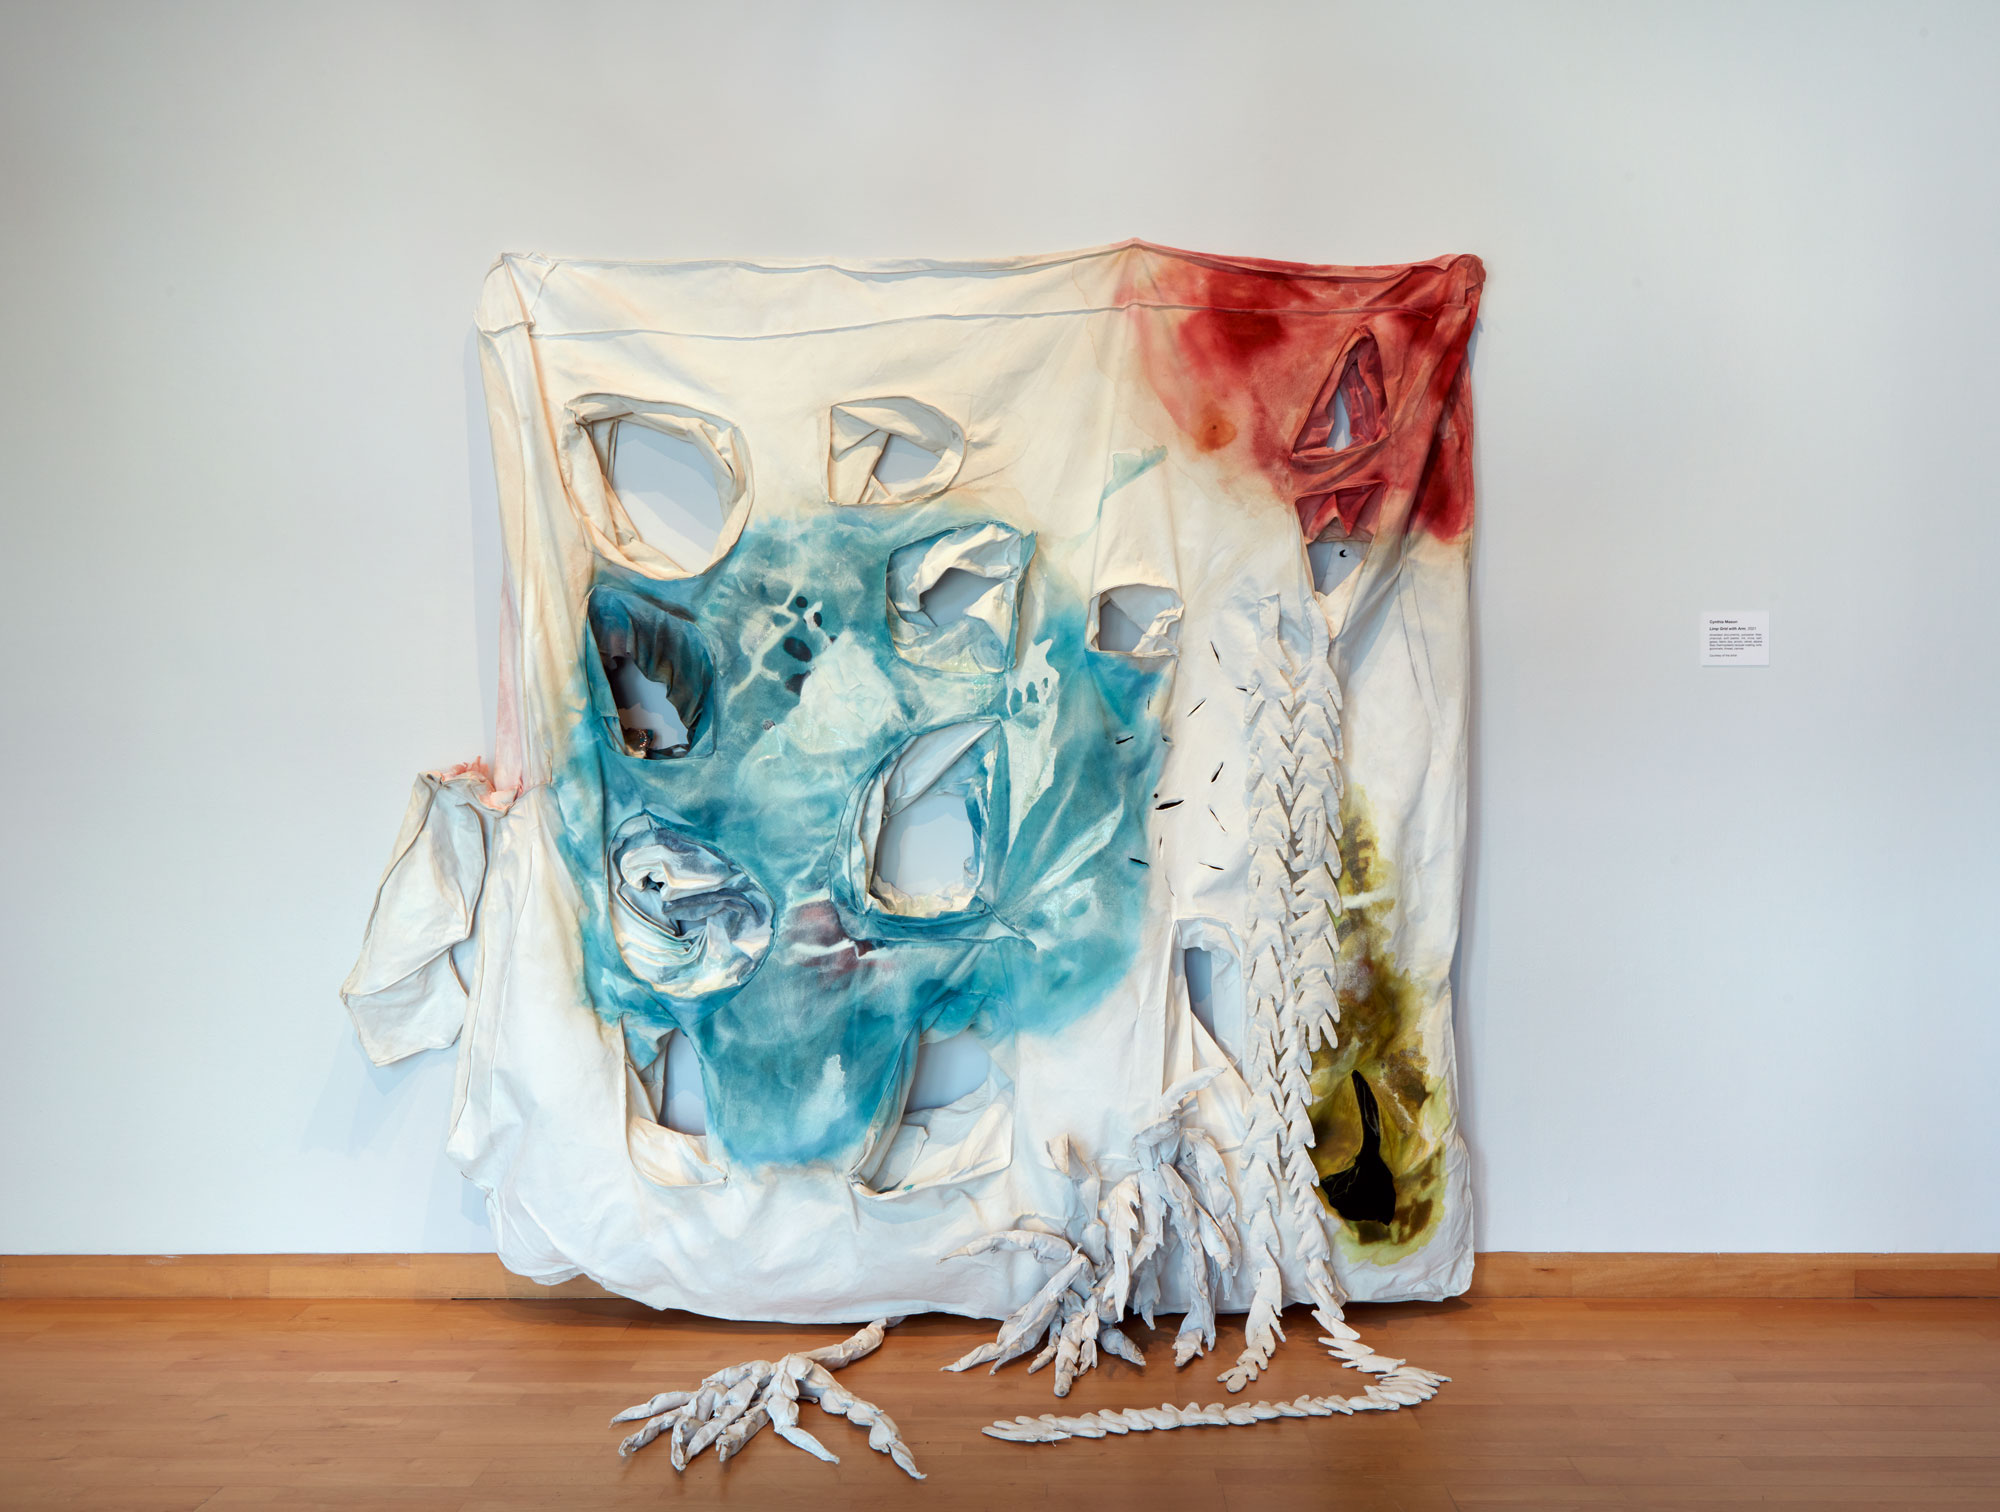 Cynthia Mason, Limp Grid with Arm, 2021. shredded documents, polyester fiber, charcoal, soft pastel, ink, mica, salt, gesso, fabric dye, acrylic, velvet, alpaca fiber, thermoplastic lacquer coating, wire, grommets, thread, canvas. 90 x 98 x 43 in. Courtesy of the artist. Installation view of Skyway 20/21 exhibition at USF Contemporary Art Museum. Photo: Will Lytch.